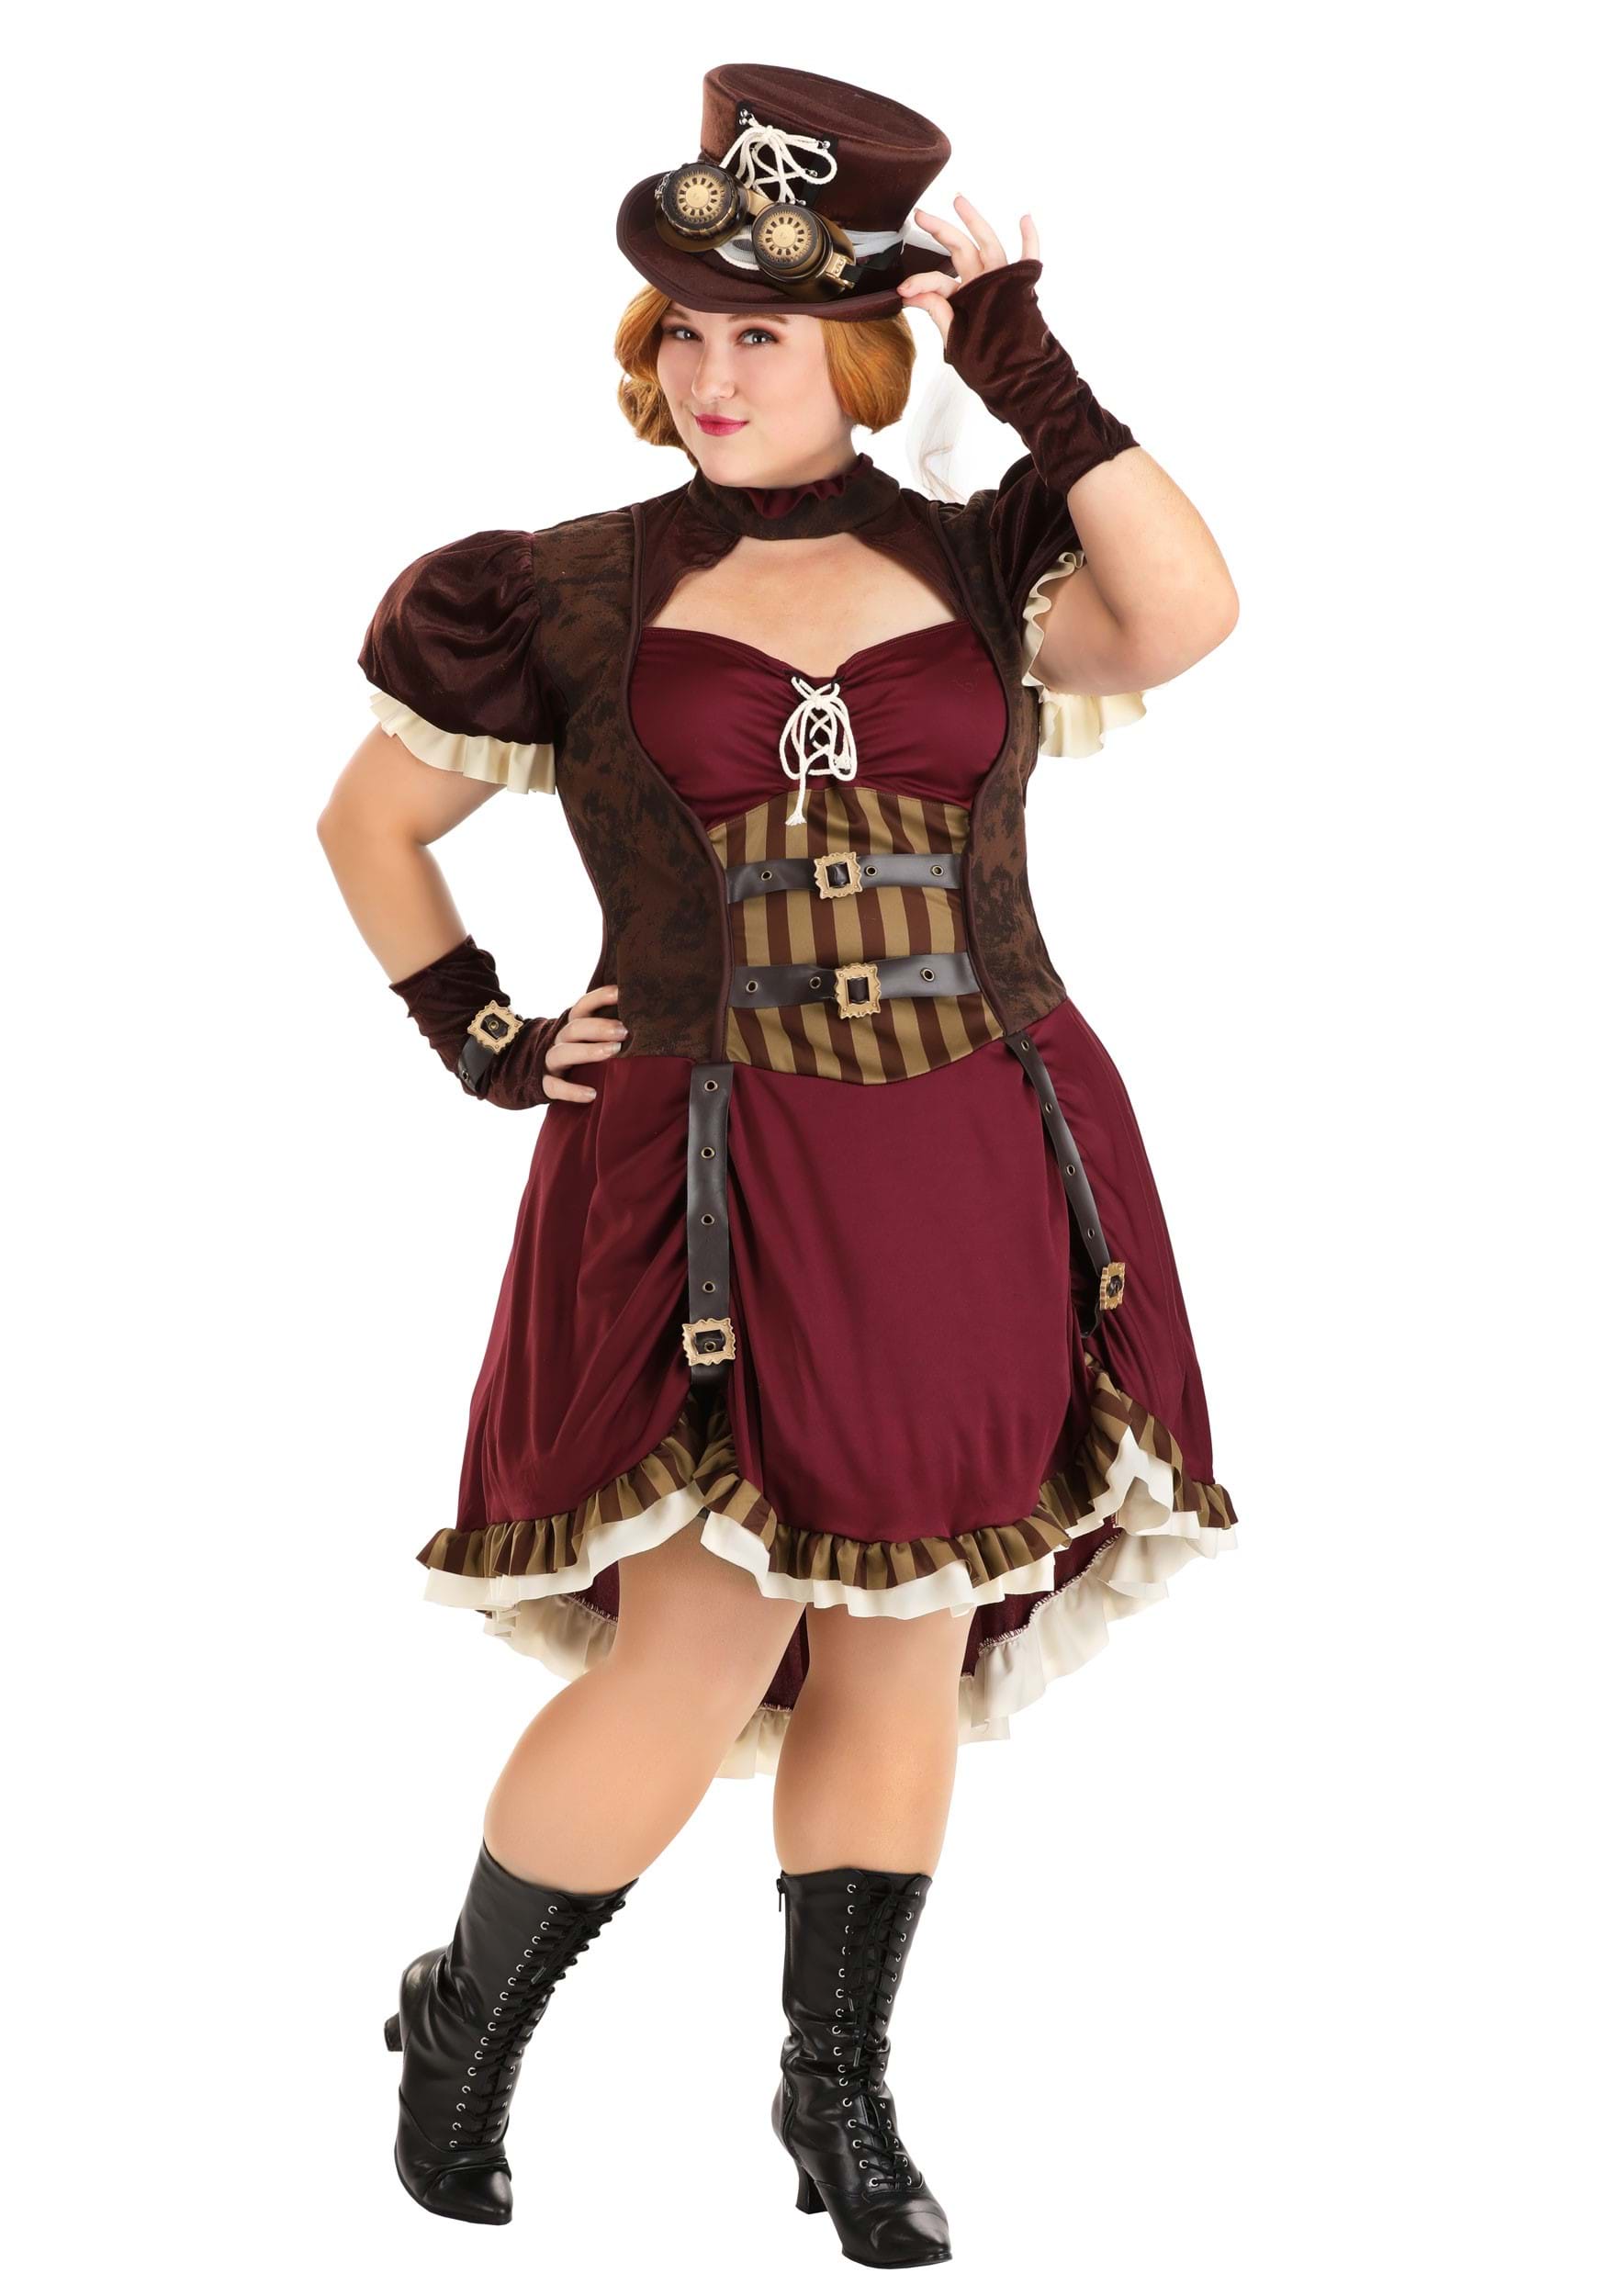 Plus Size Steampunk Lady Costume for Women